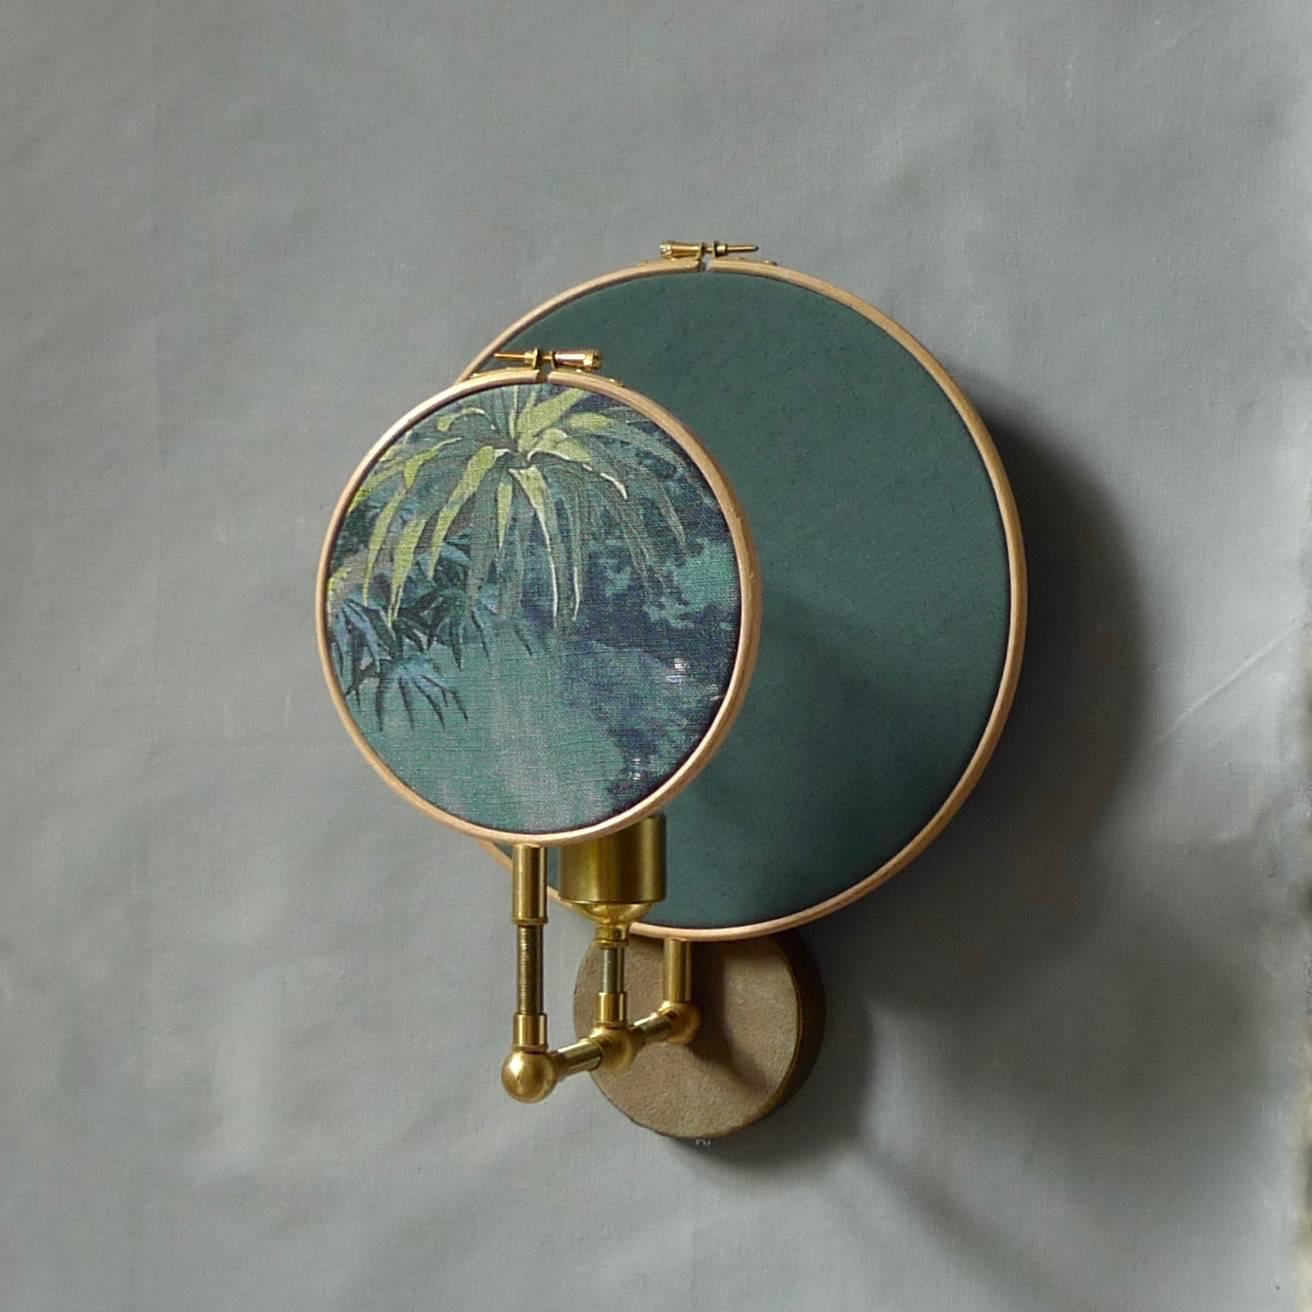 Circle blue grey, wall sconce ensemble, Sander Bottinga
Handmade in brass, leather, wood and linen.
A dimmer is inlaid with leather. Also possible without a dimmer
Dimensions: H 35 x W 27 x D 23 cm
The design artwork is meticulously handcrafted